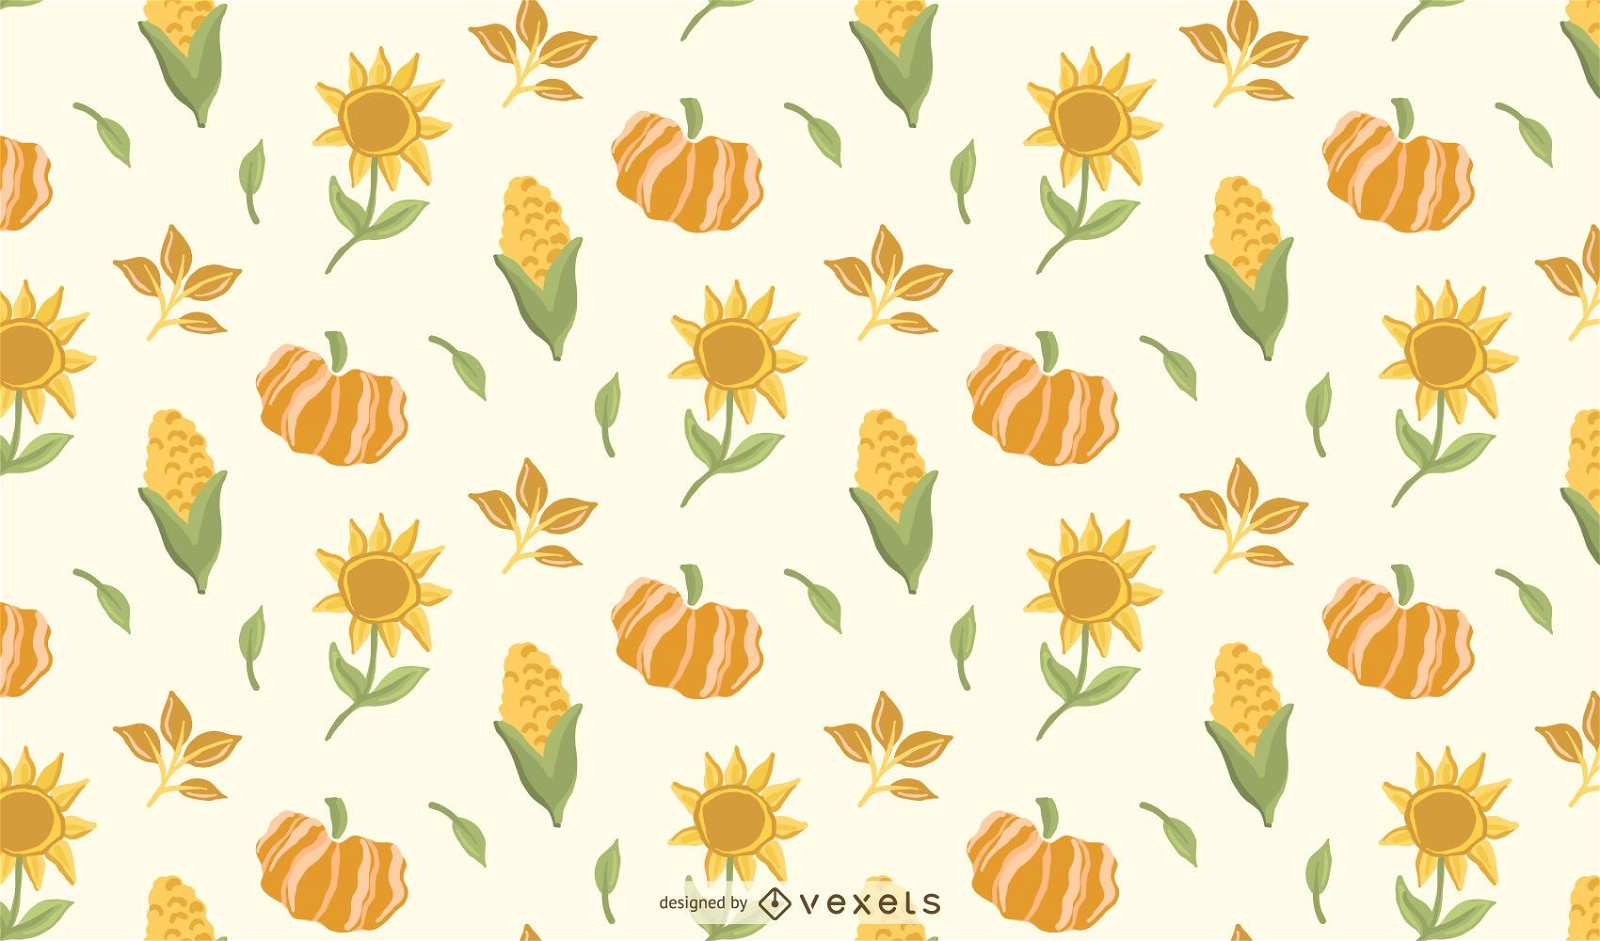 Thanksgiving food and sunflowers pattern design